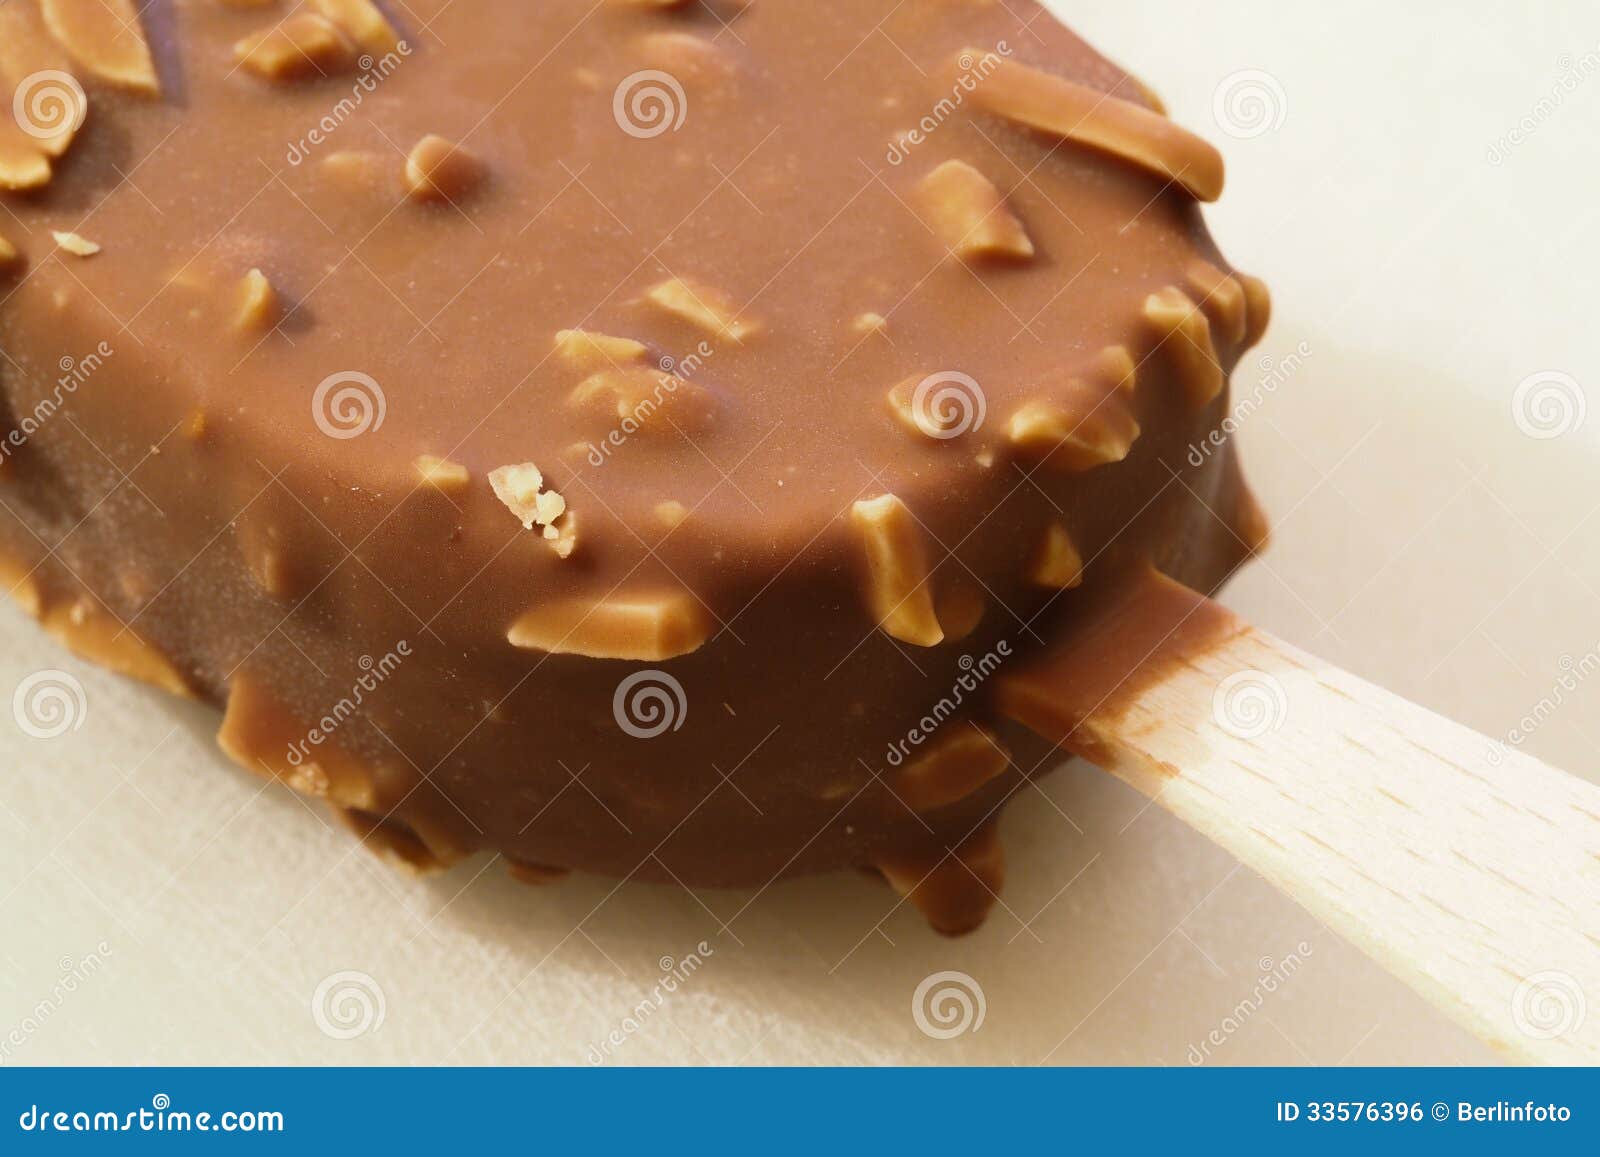 Ice cream with chocolate stock photo. Image of frosting - 33576396